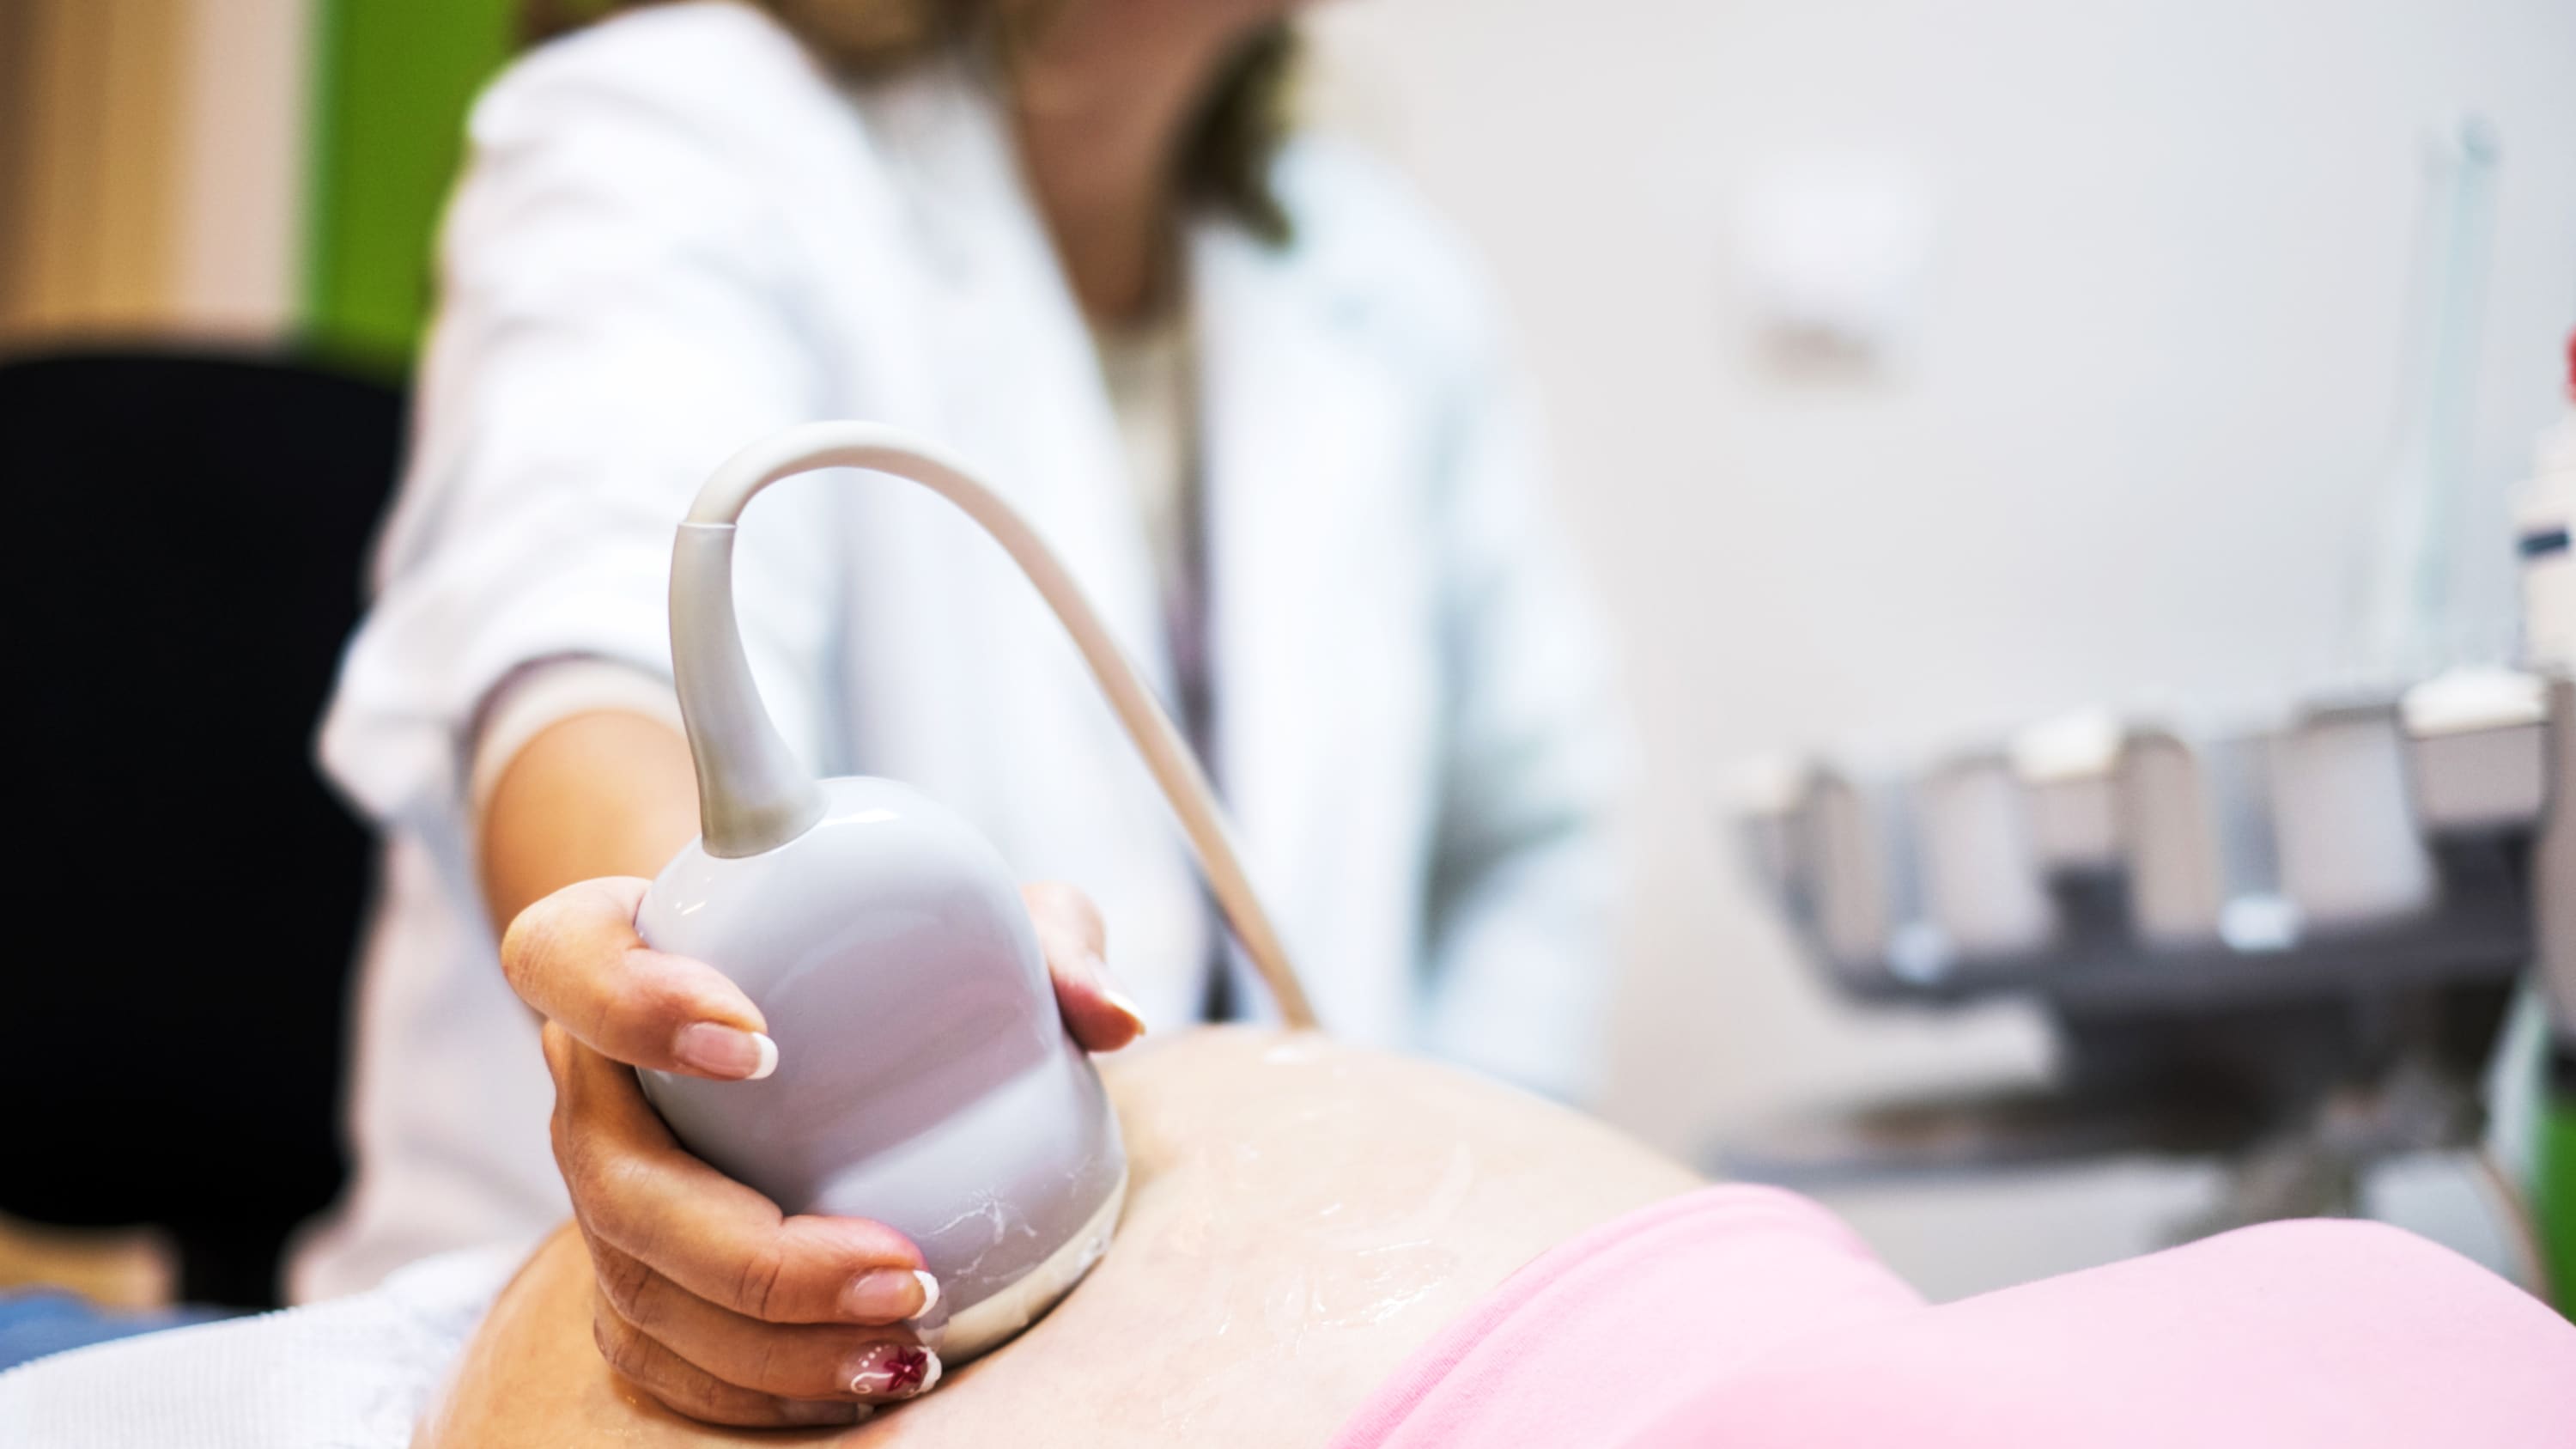 Fetal therapy is performed on a woman with an ultrasound on her belly